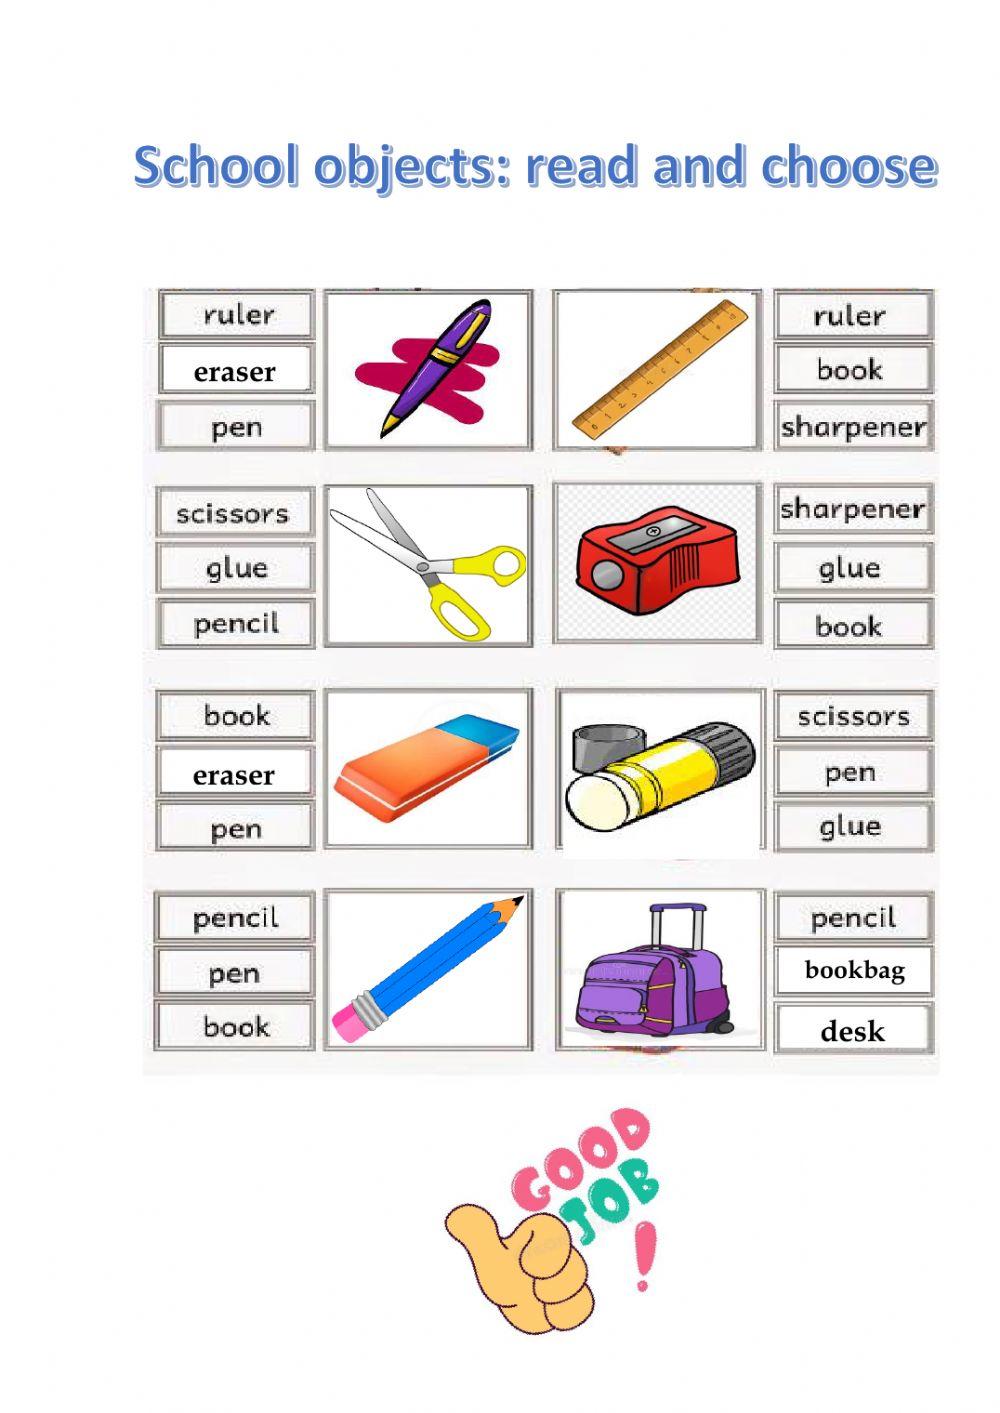 School objects: read and choose